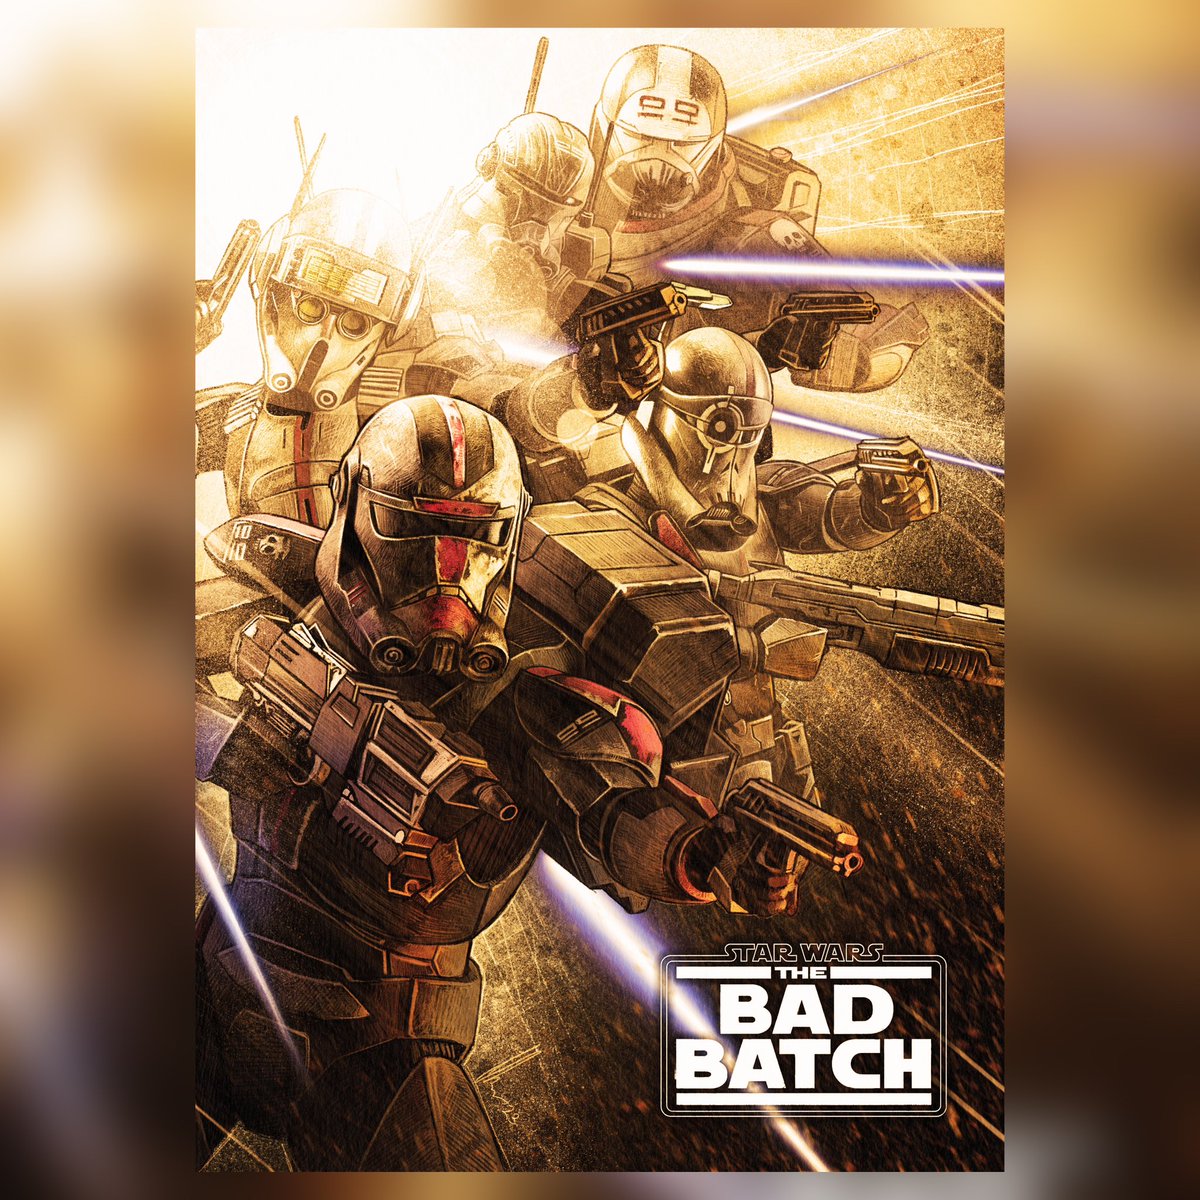 My ode to The Bad Batch. Season 2 has been AMAZING 🔥🔥🔥 

#starwars #thebadbatch #starwarsthebadbatch #clones #clonetroopers #art #chrisowenart #posterspy